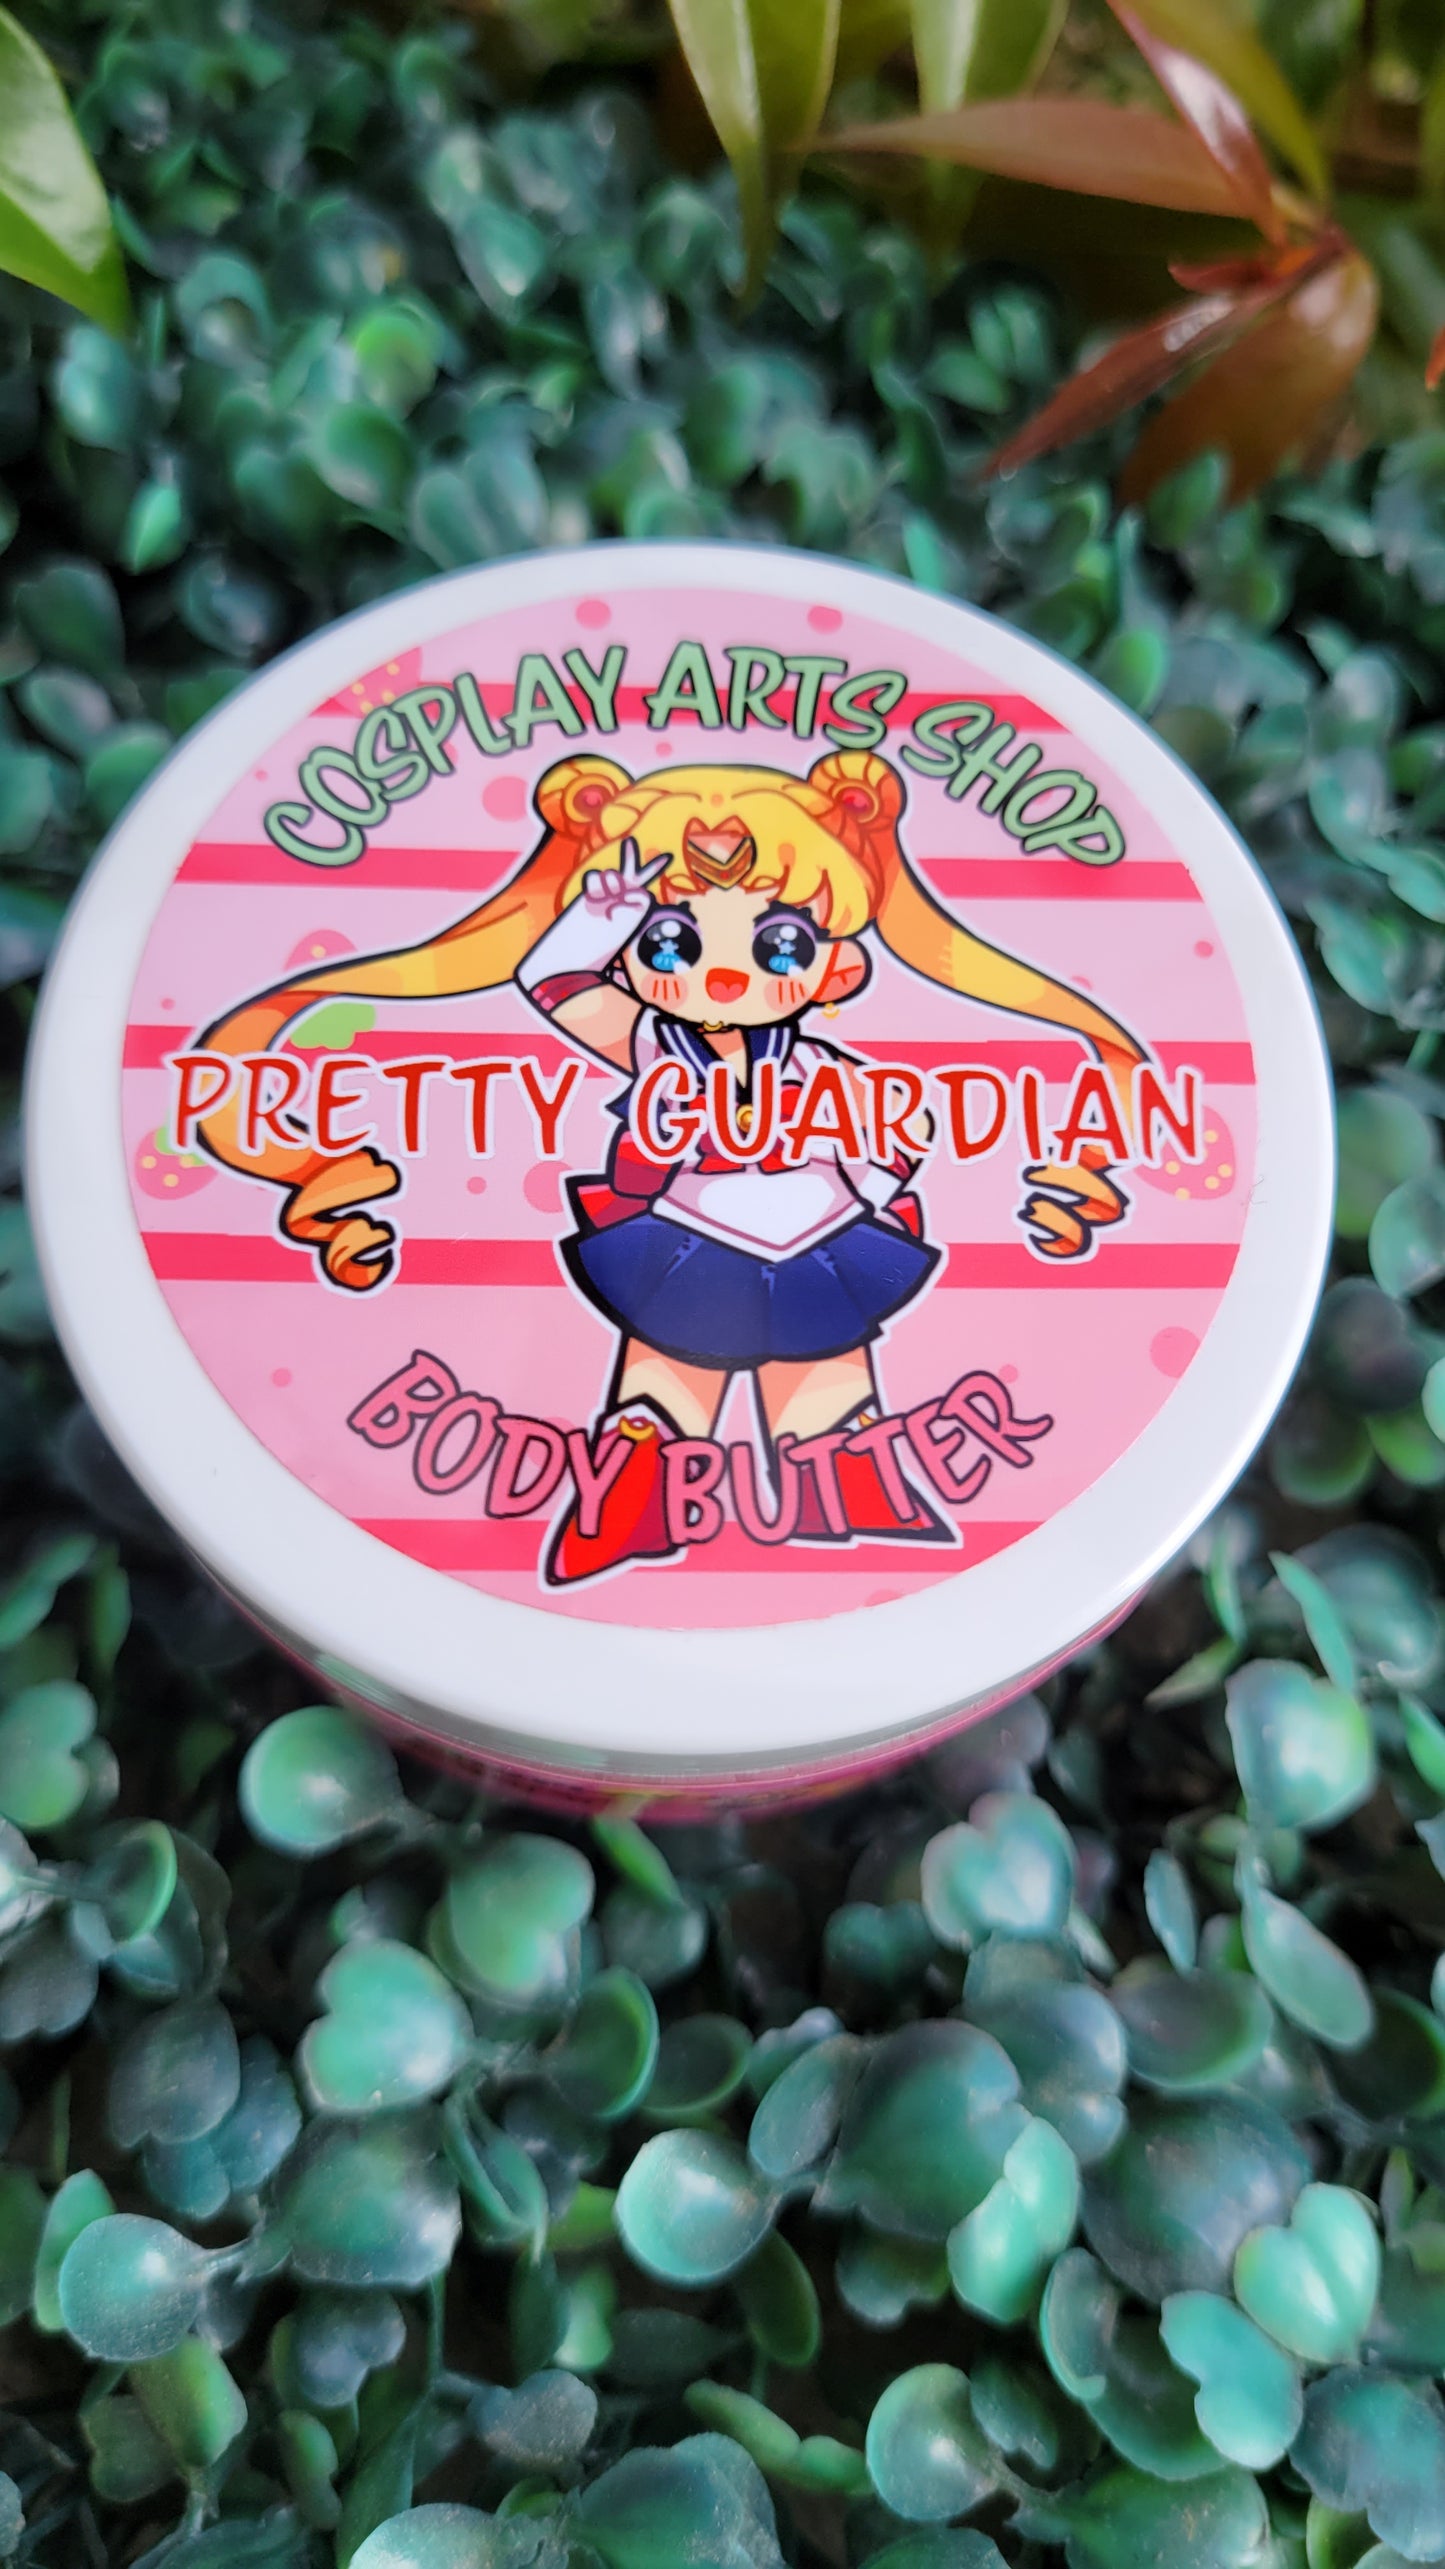 Pretty Guardian  Whipped Body Butter - Cosplay Arts Shop